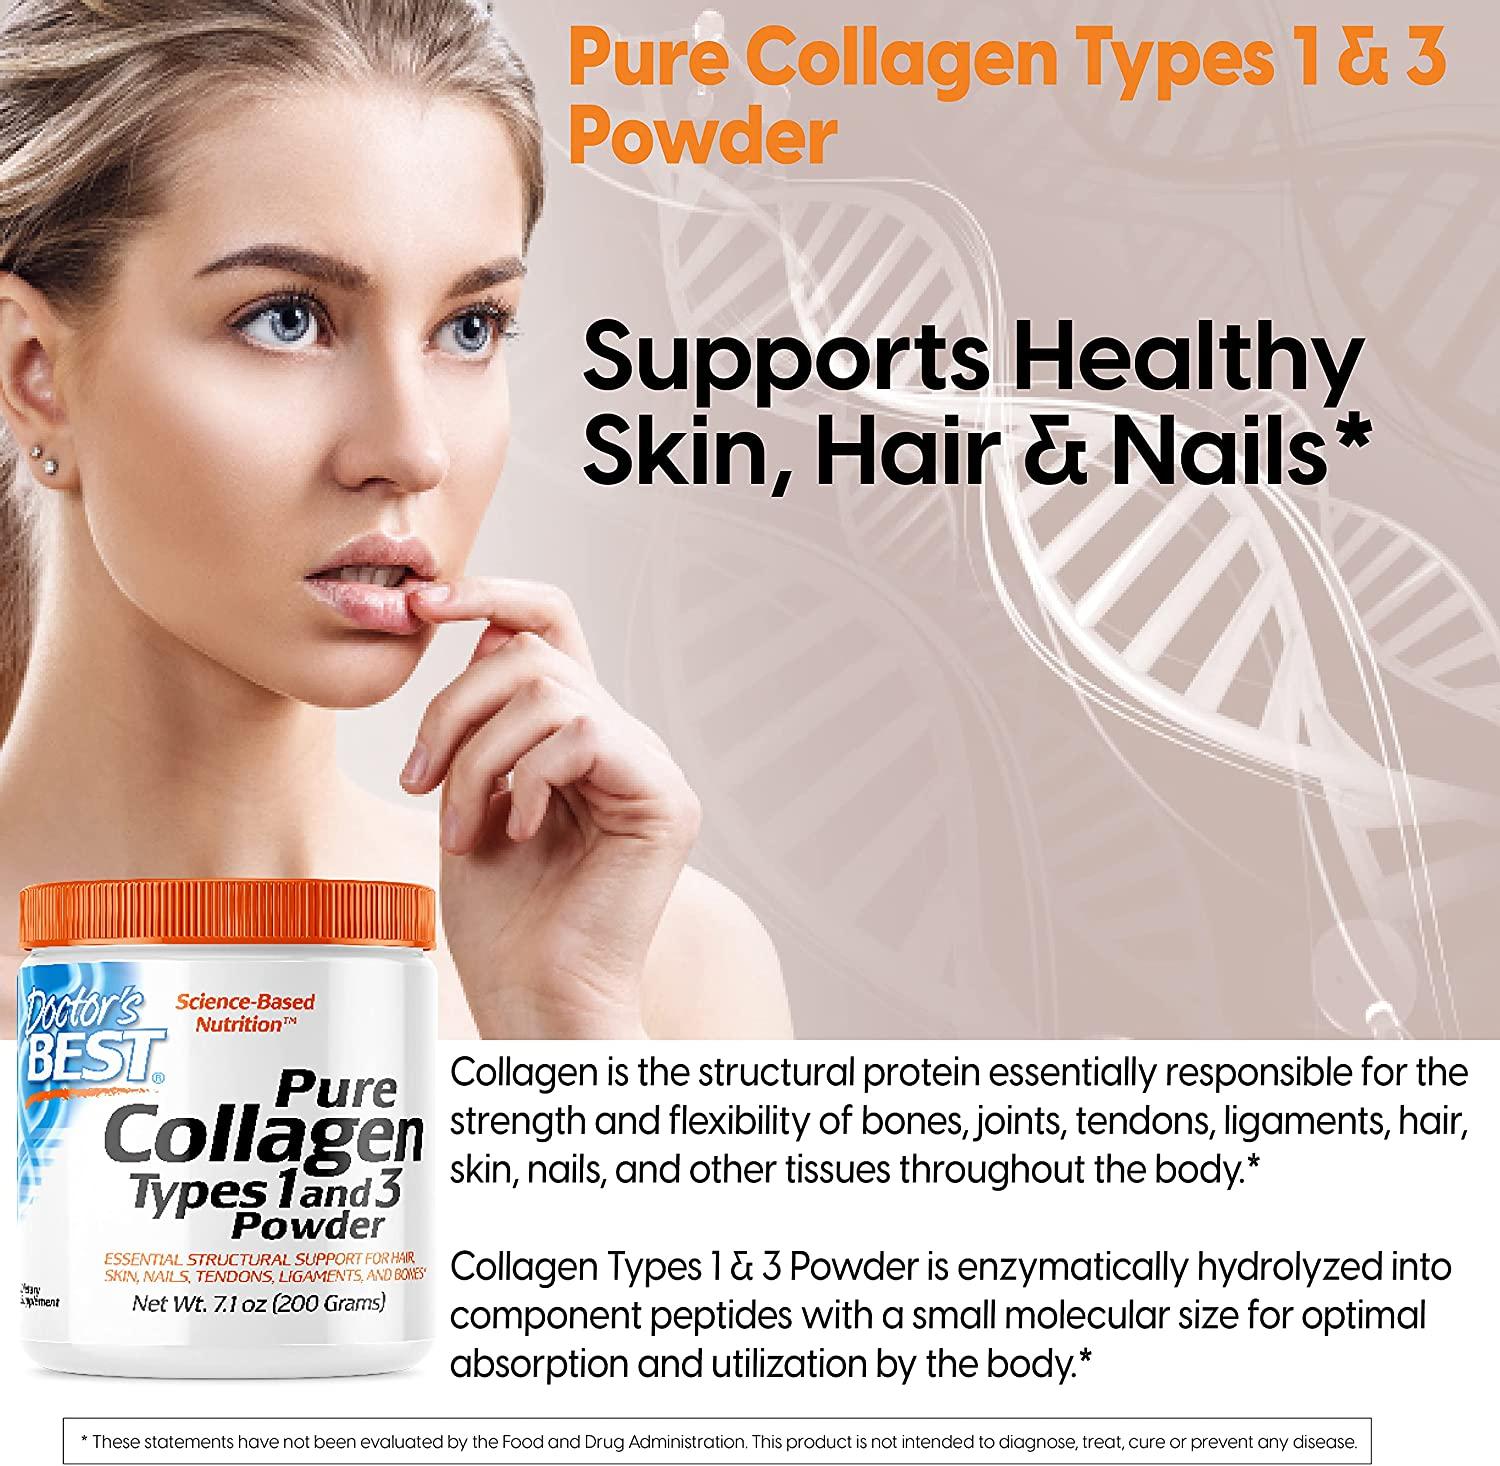 Doctor's Best Pure Collagen Types 1 and 3 Powder 7.1 oz (200 g)